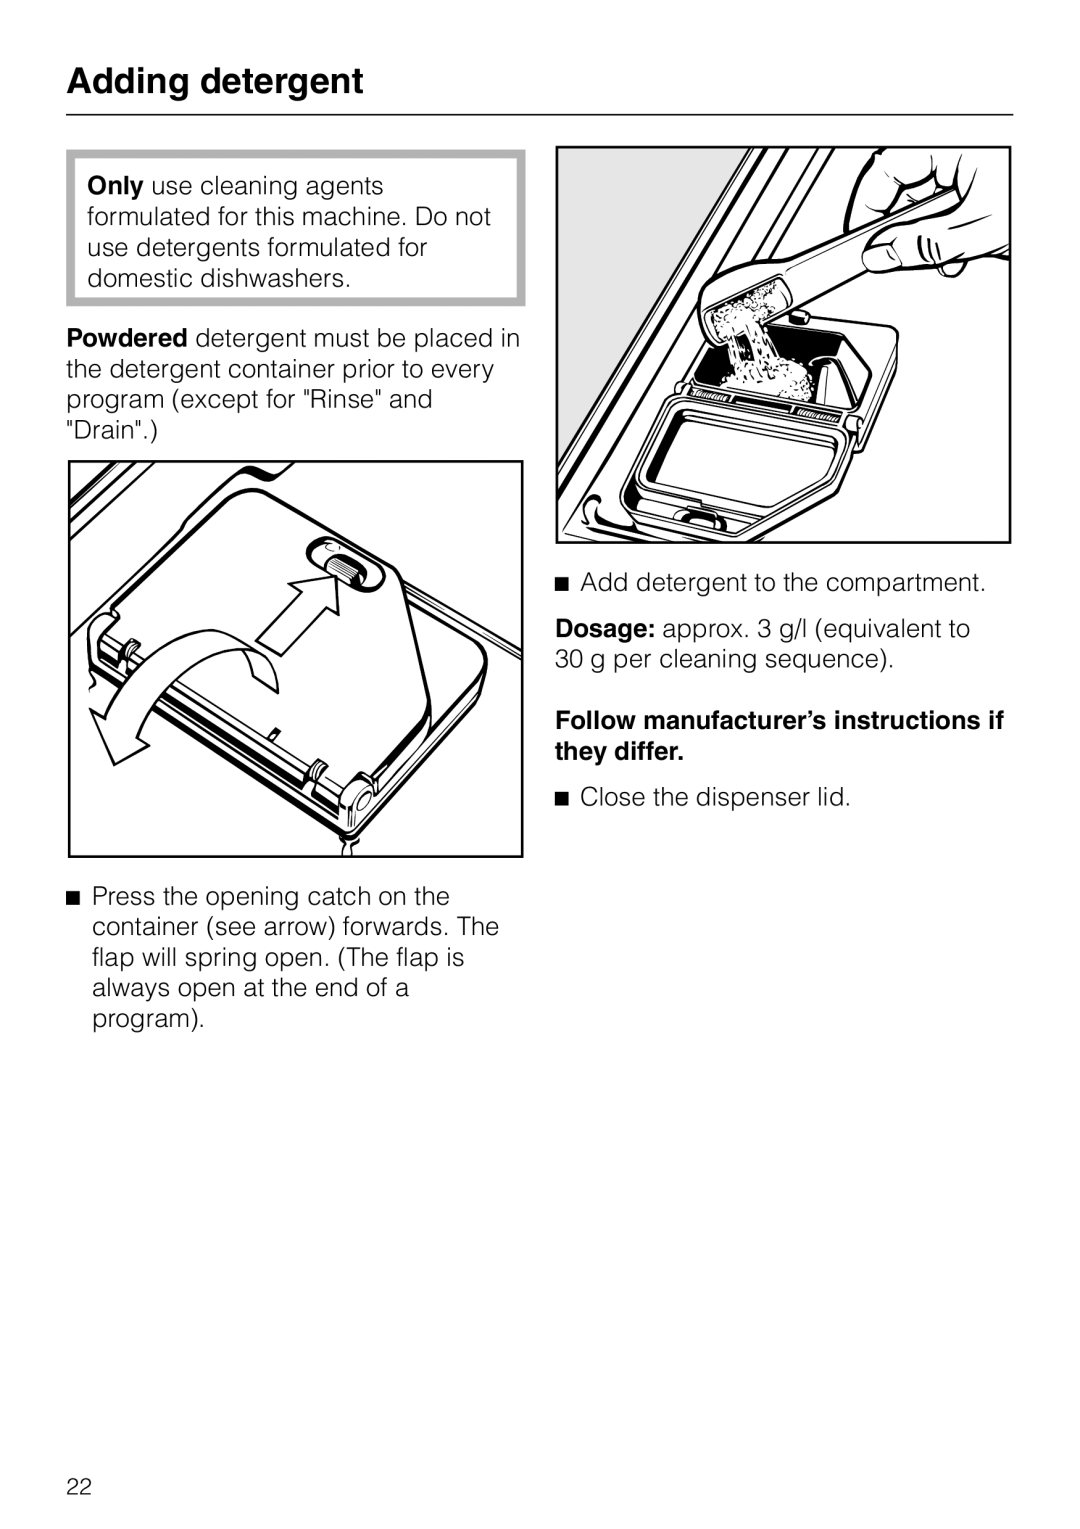 Miele G 7804 manual Adding detergent, Add detergent to the compartment, Follow manufacturer’s instructions if they differ 